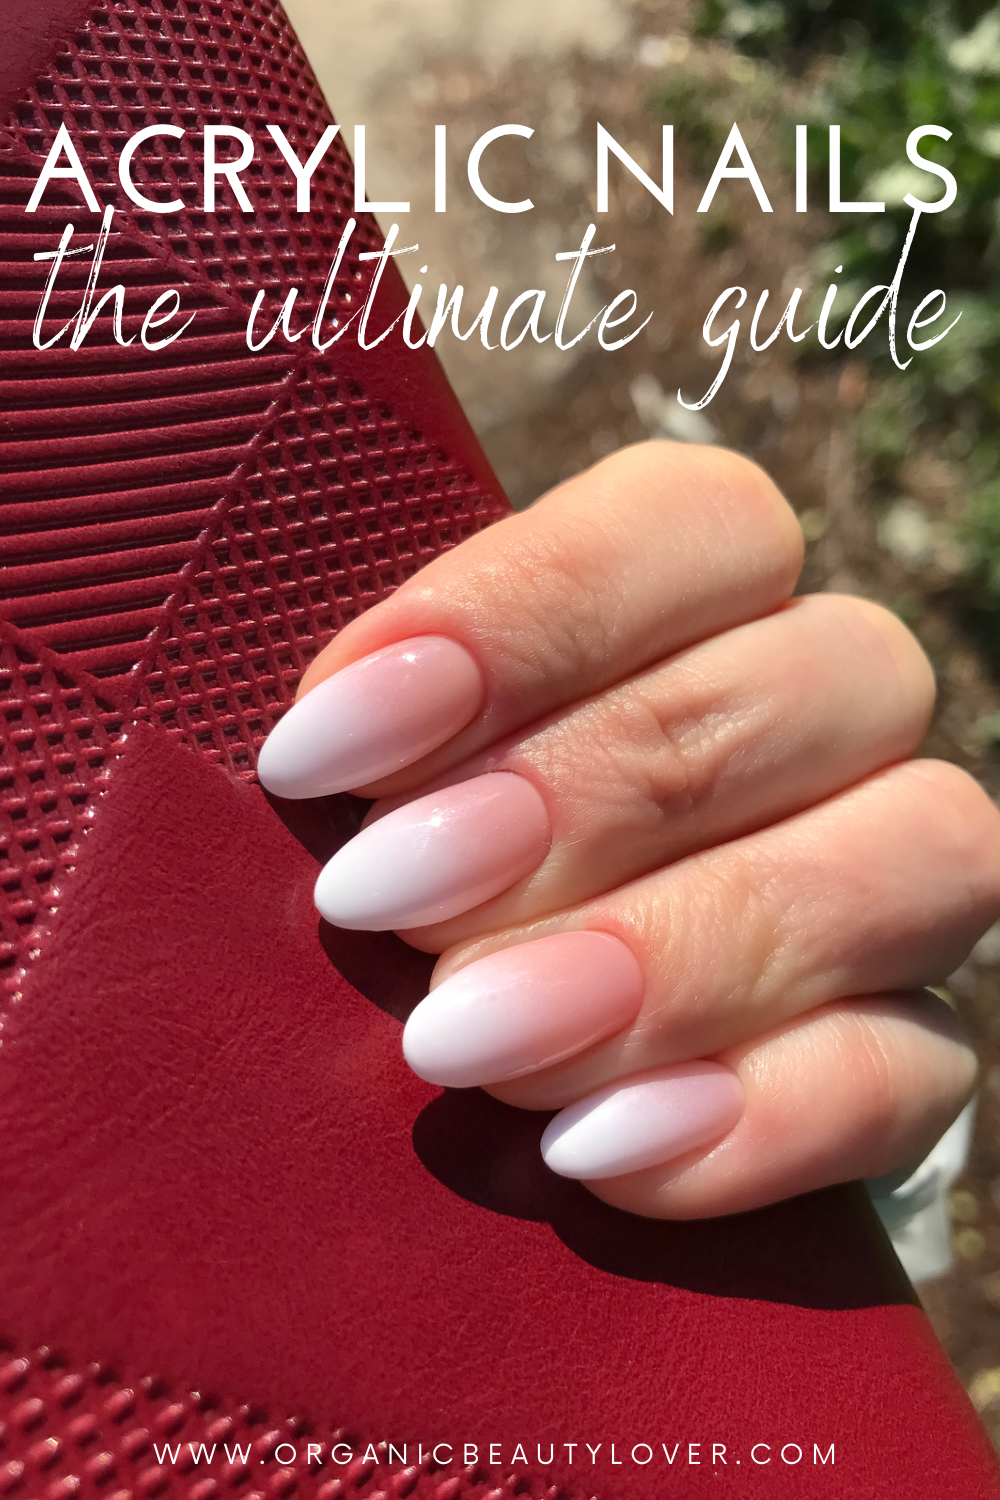 Acrylic nails guide